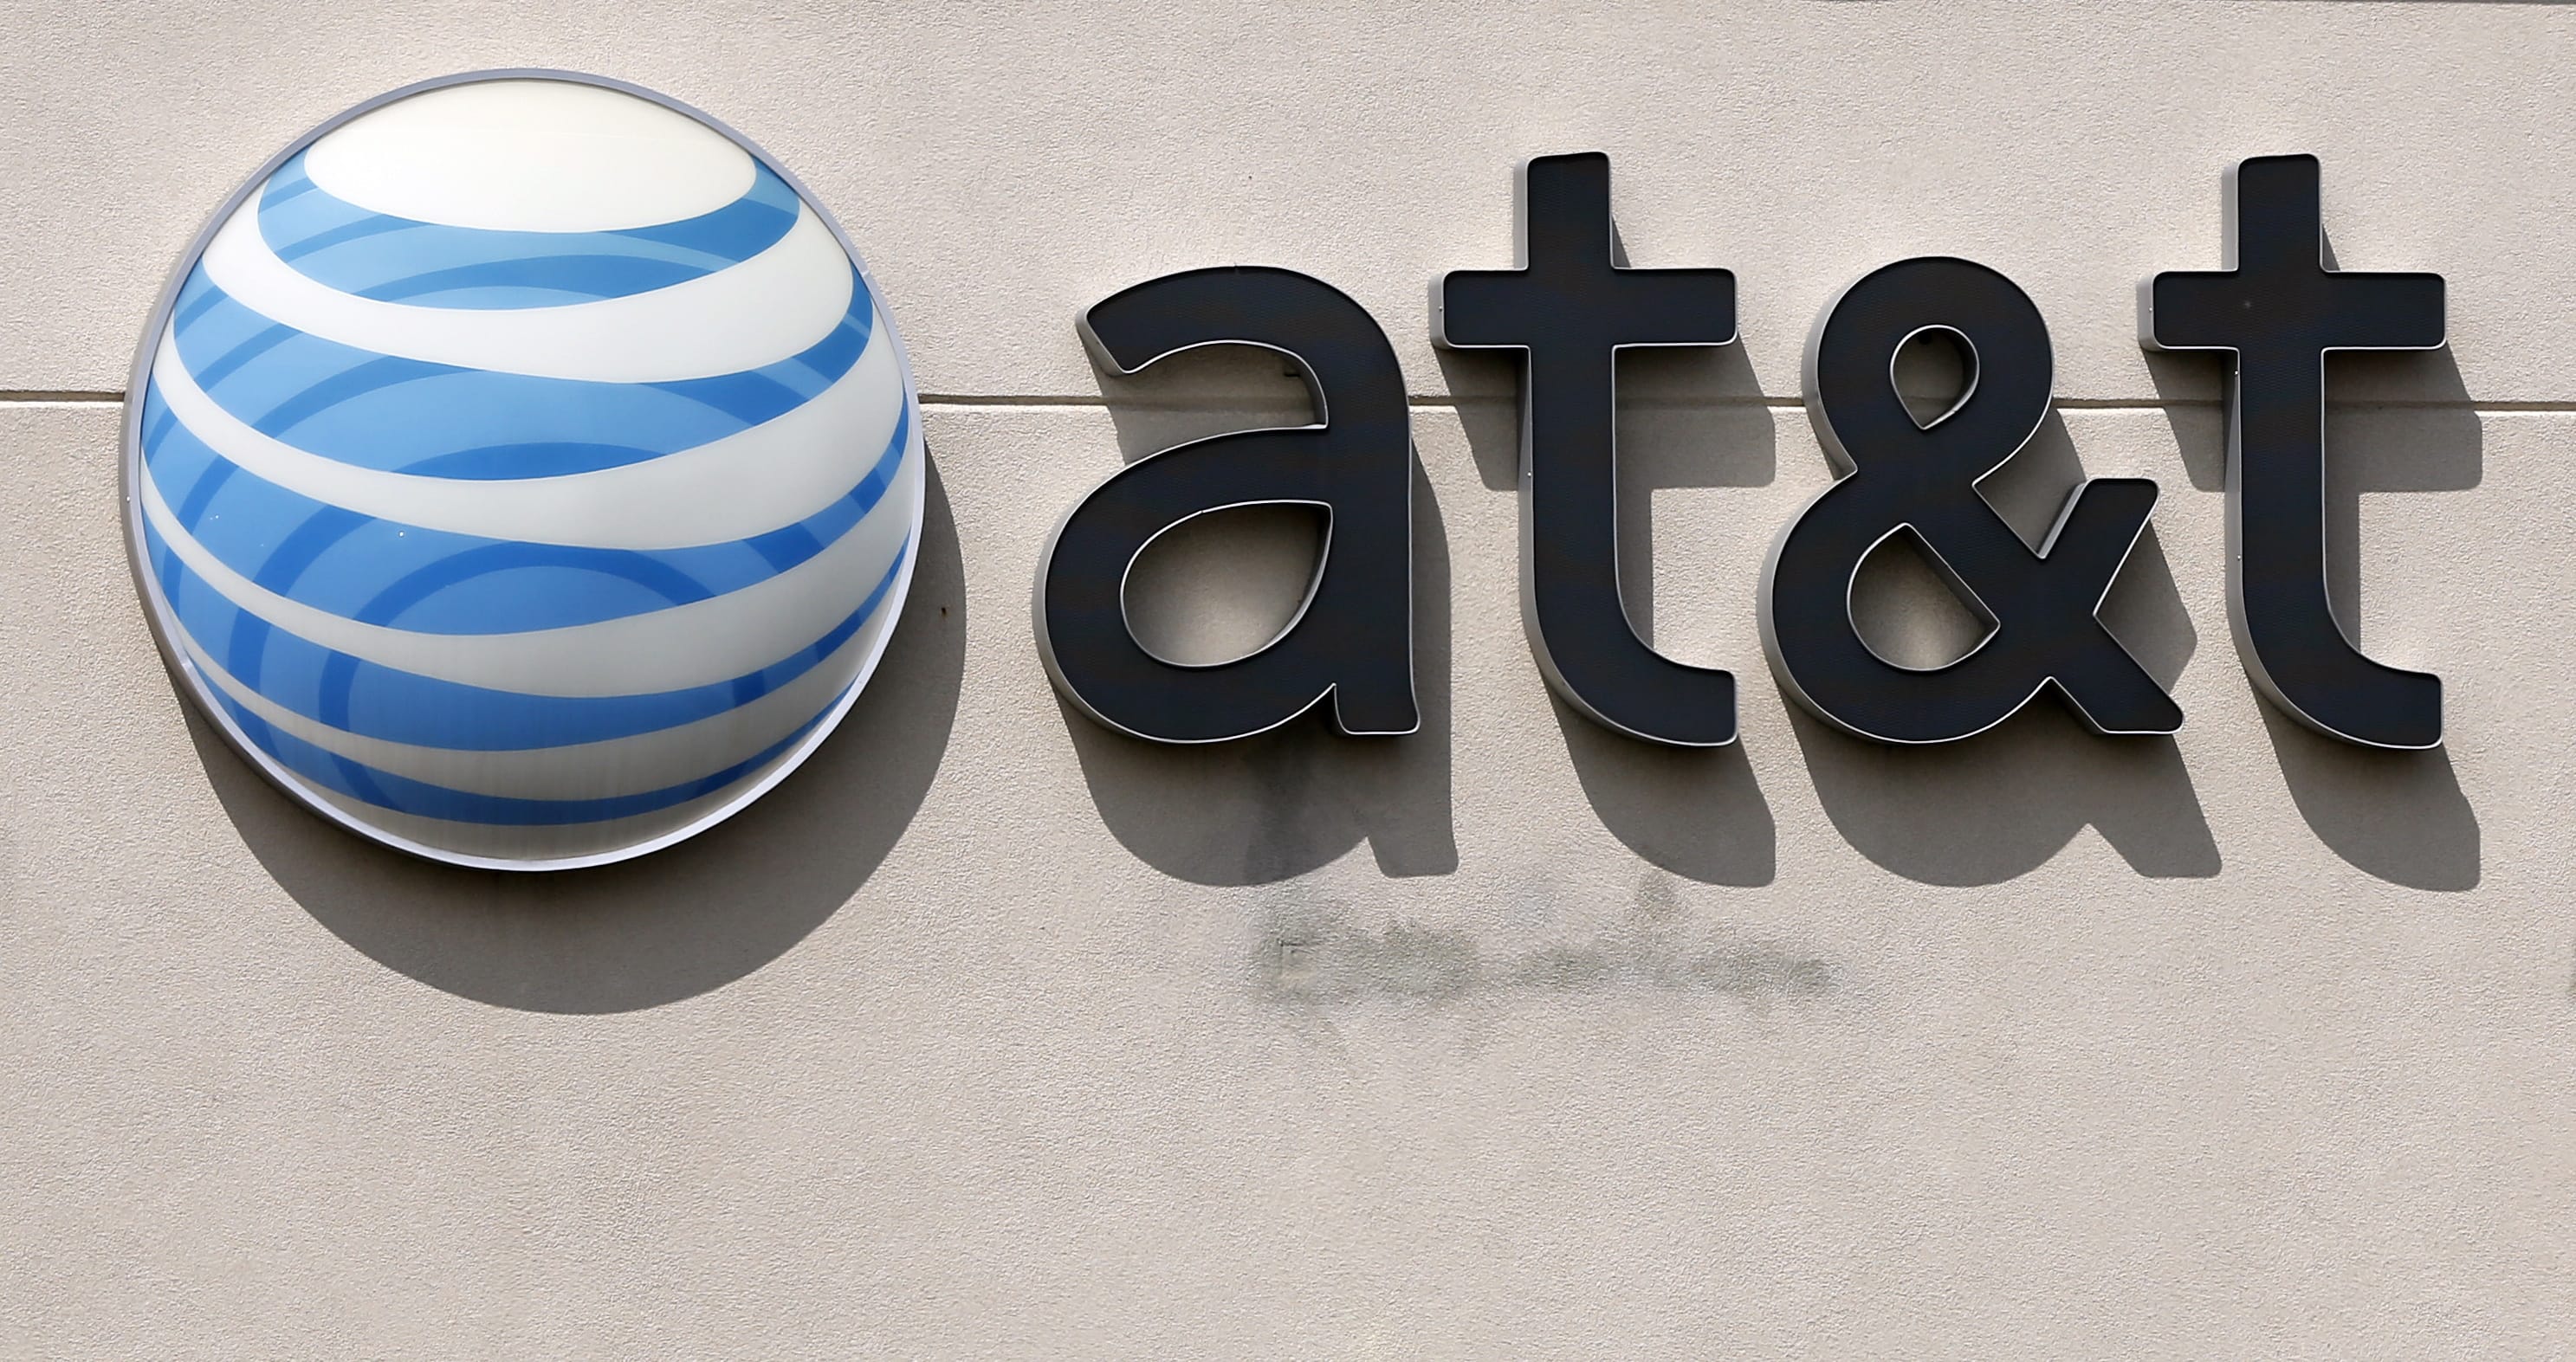 FILE - This May 14, 2014 file photo shows an AT&amp;T logo on a store in Dedham, Mass. On Saturday, Oct. 22, 2016, several reports citing unnamed sources said the giant phone company is in advanced talks to buy Time Warner, owner of the Warner Bros. movie studio as well as HBO and CNN. AT&amp;T is said to be offering $80 billion or more, a massive deal that would shake up the media landscape.